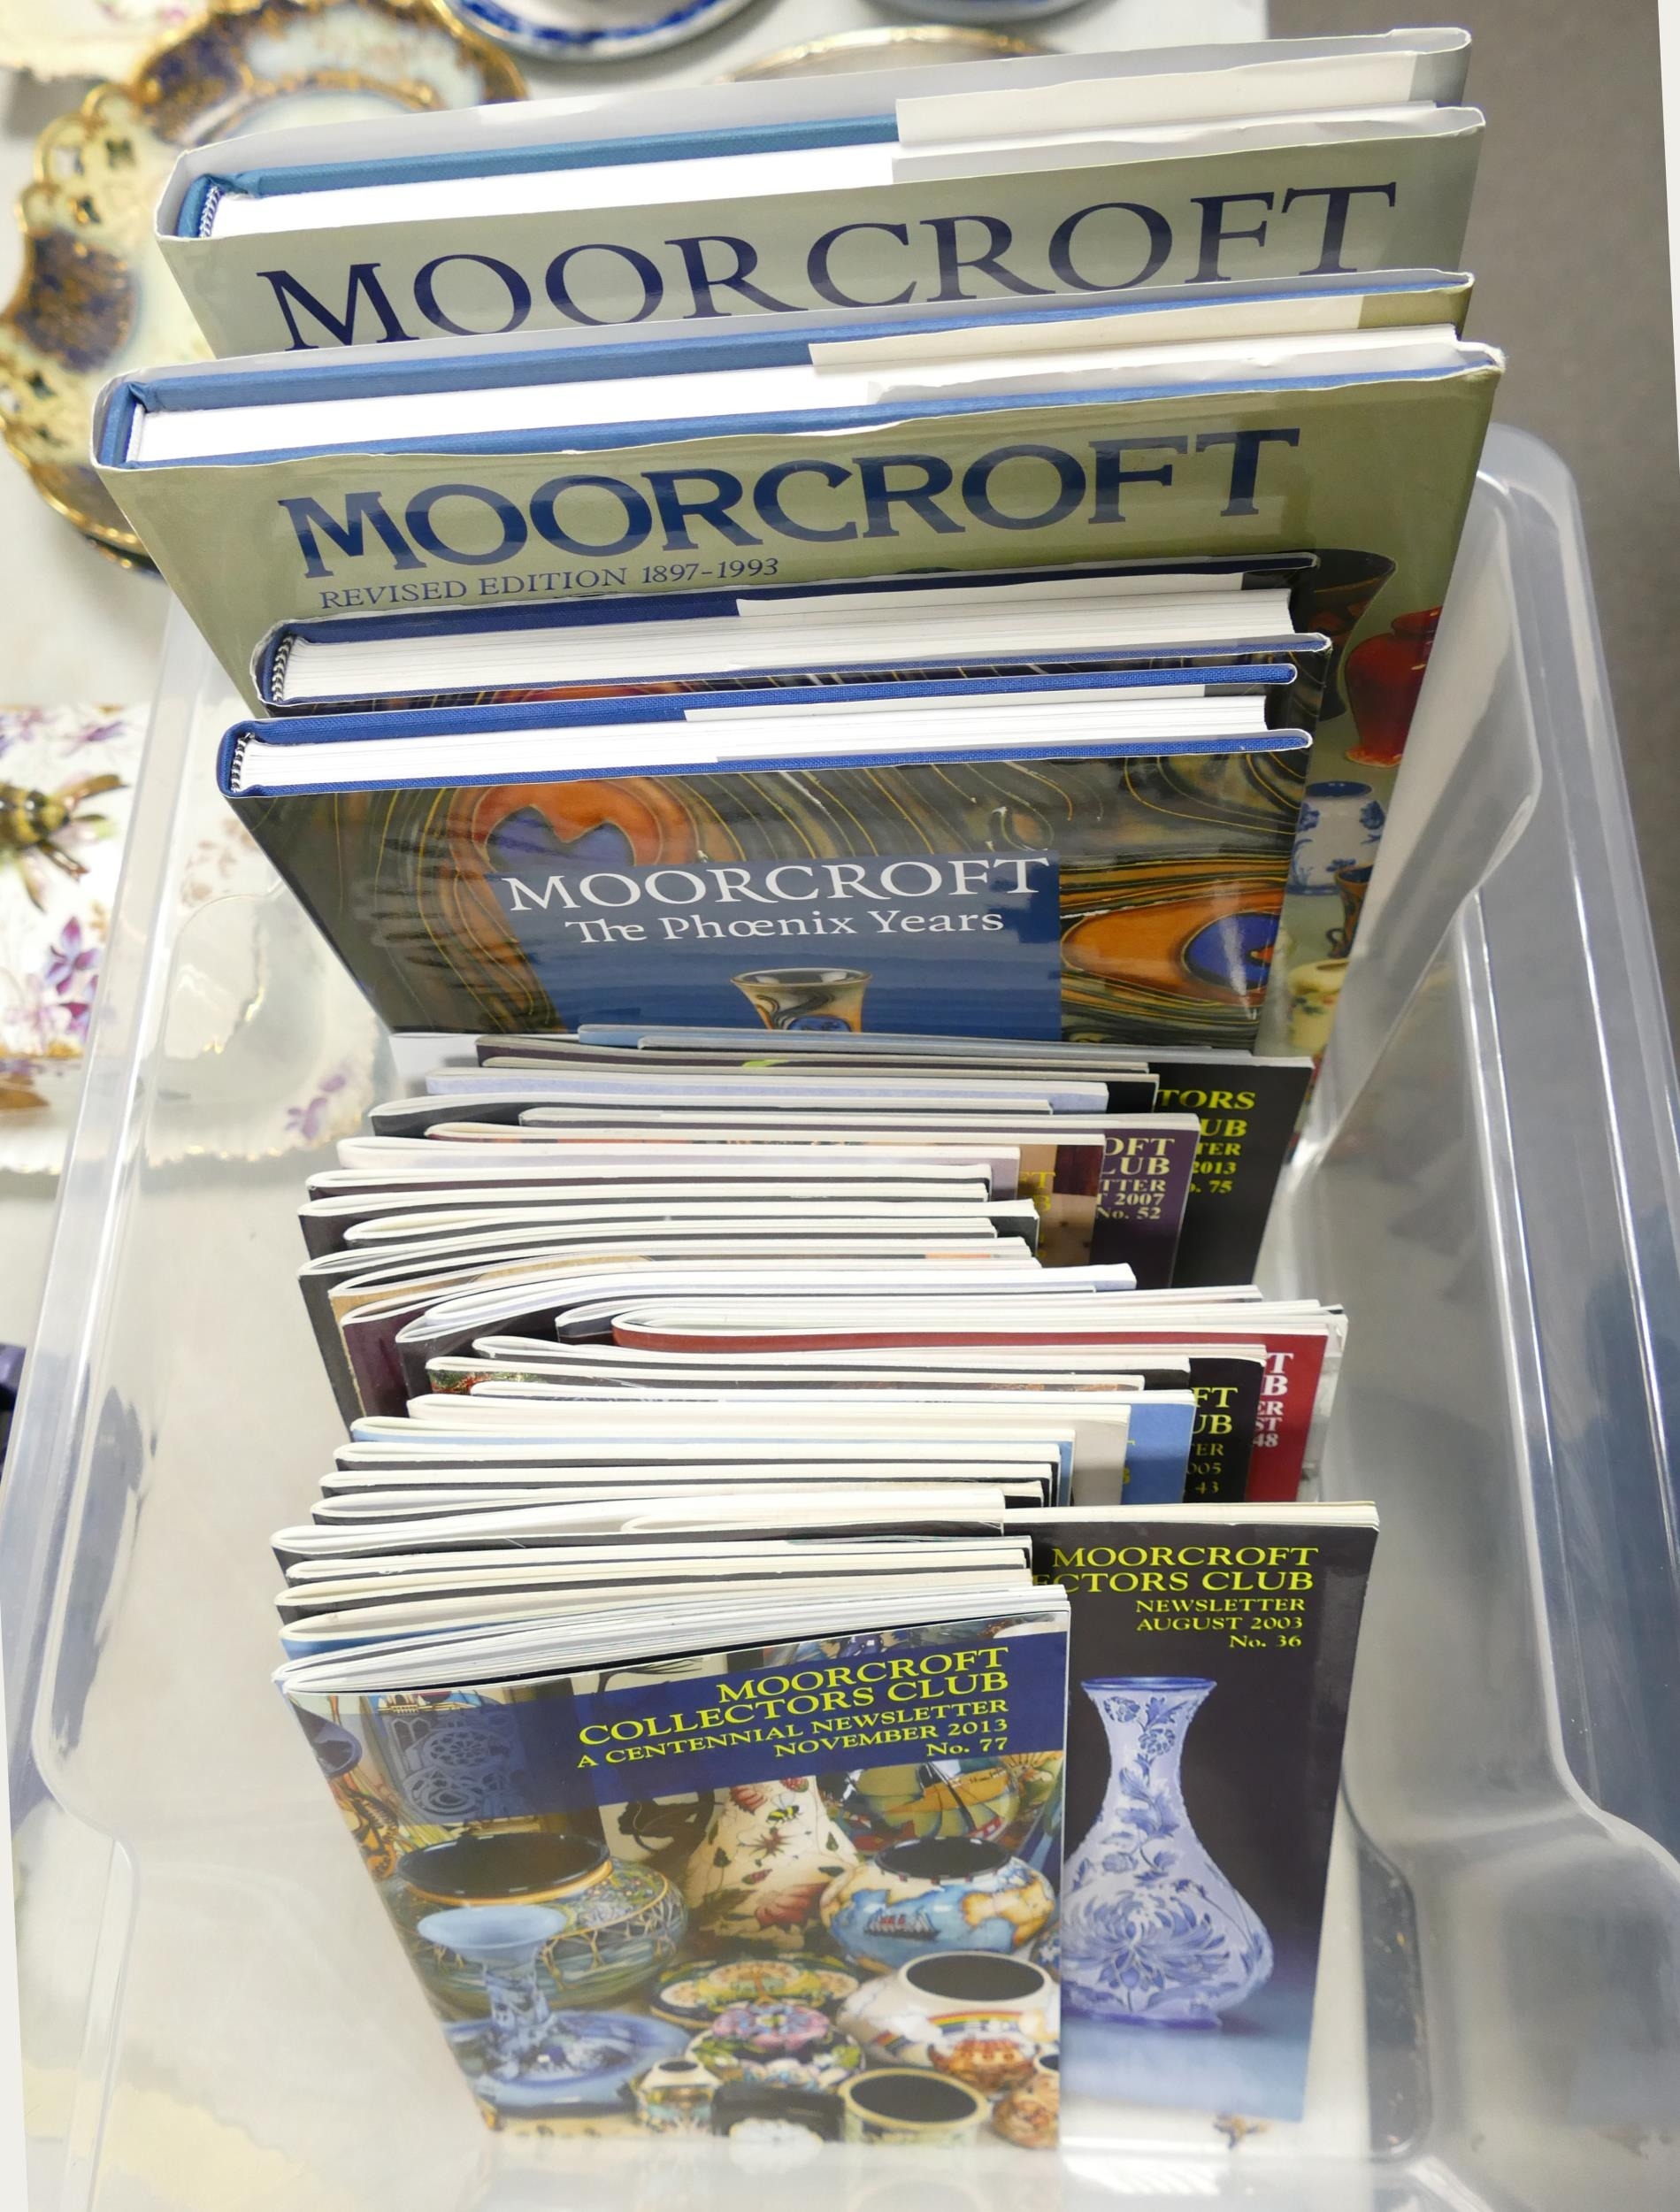 Moorcroft books to include 1897 to 1993 new edition, winds of change, 1897 to 1993 revised